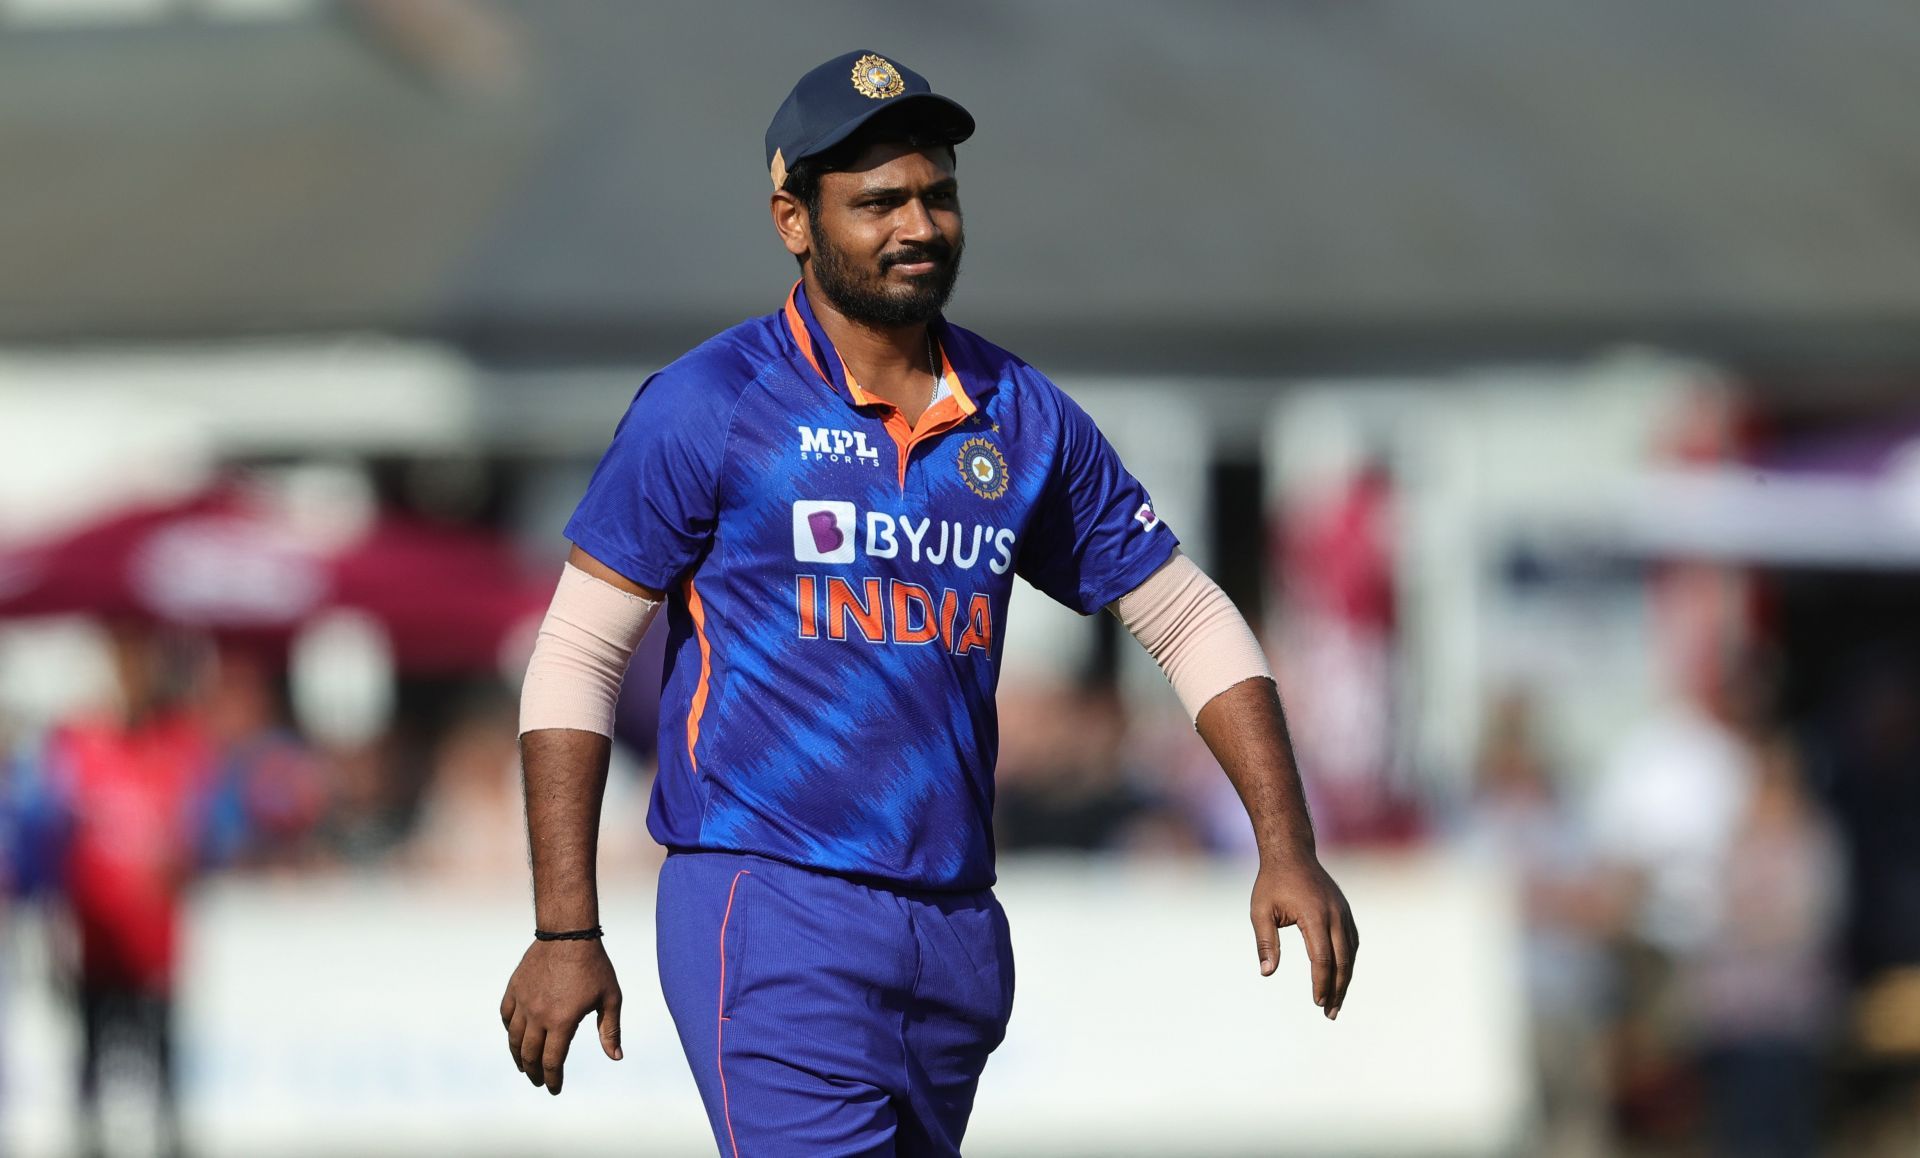 Sanju Samson is playing the second ODI against the West Indies